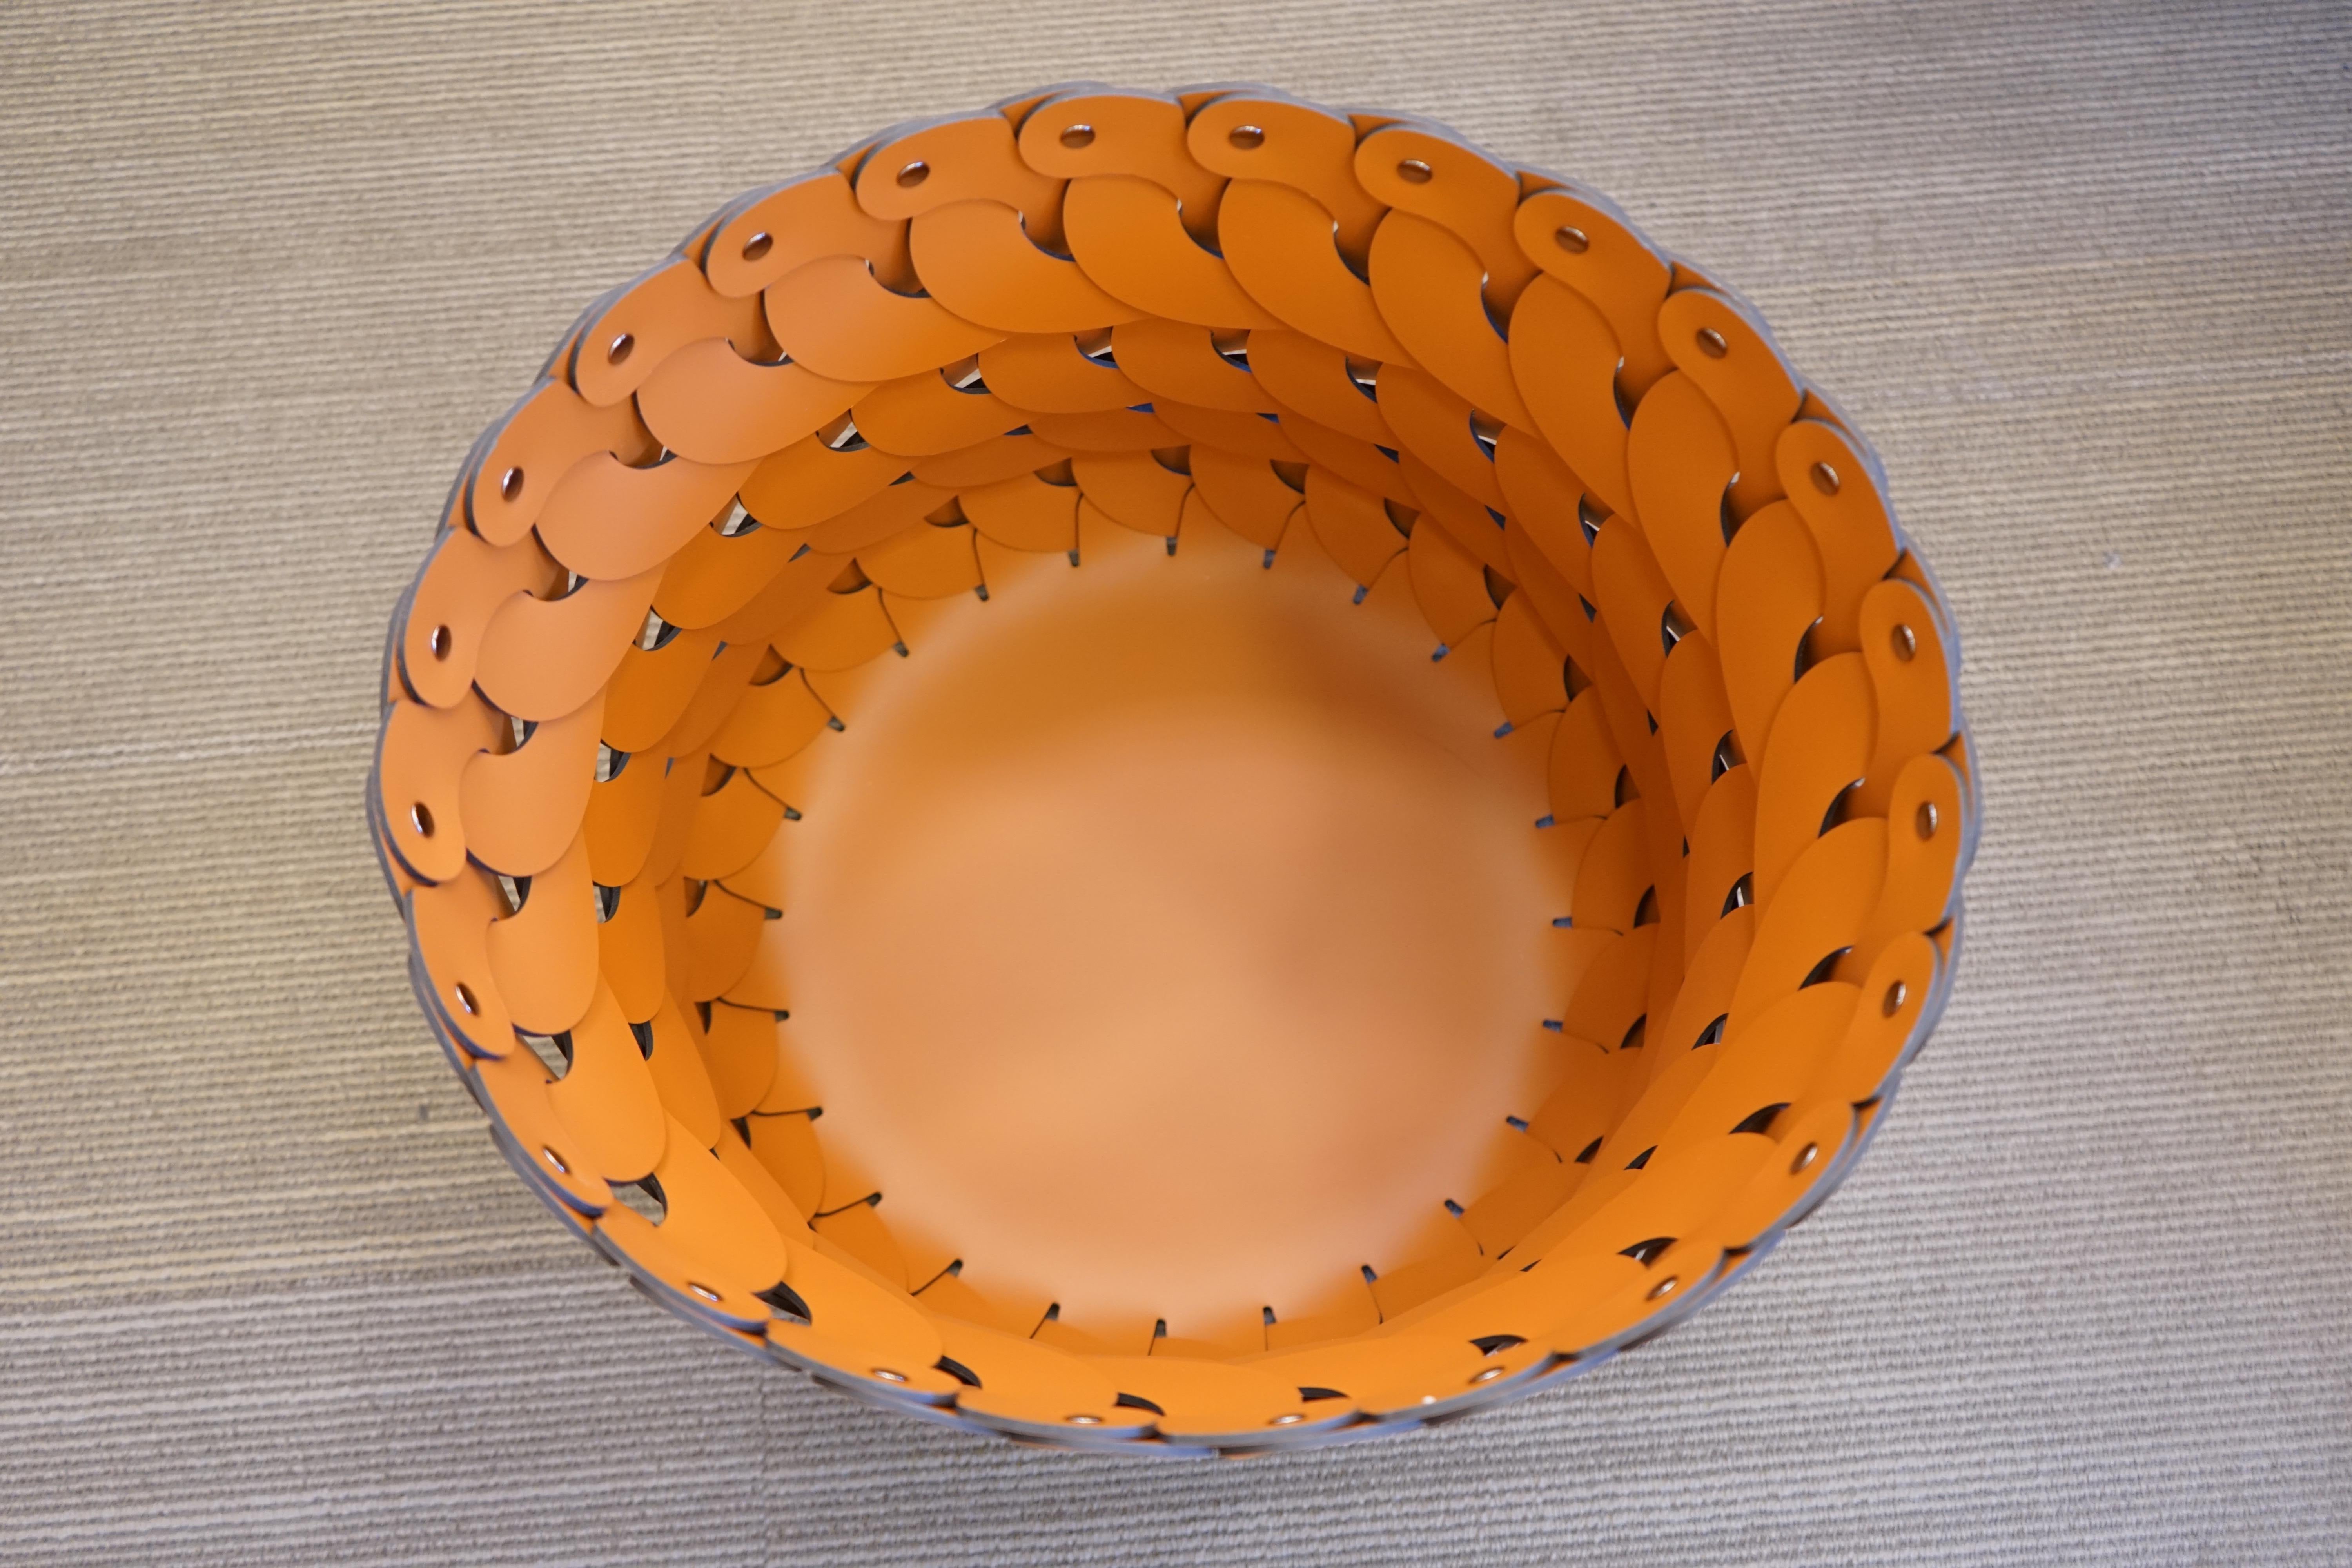 Contemporary tan woven leather circular Alicante basket by Pinetti. Handmade in Italy.